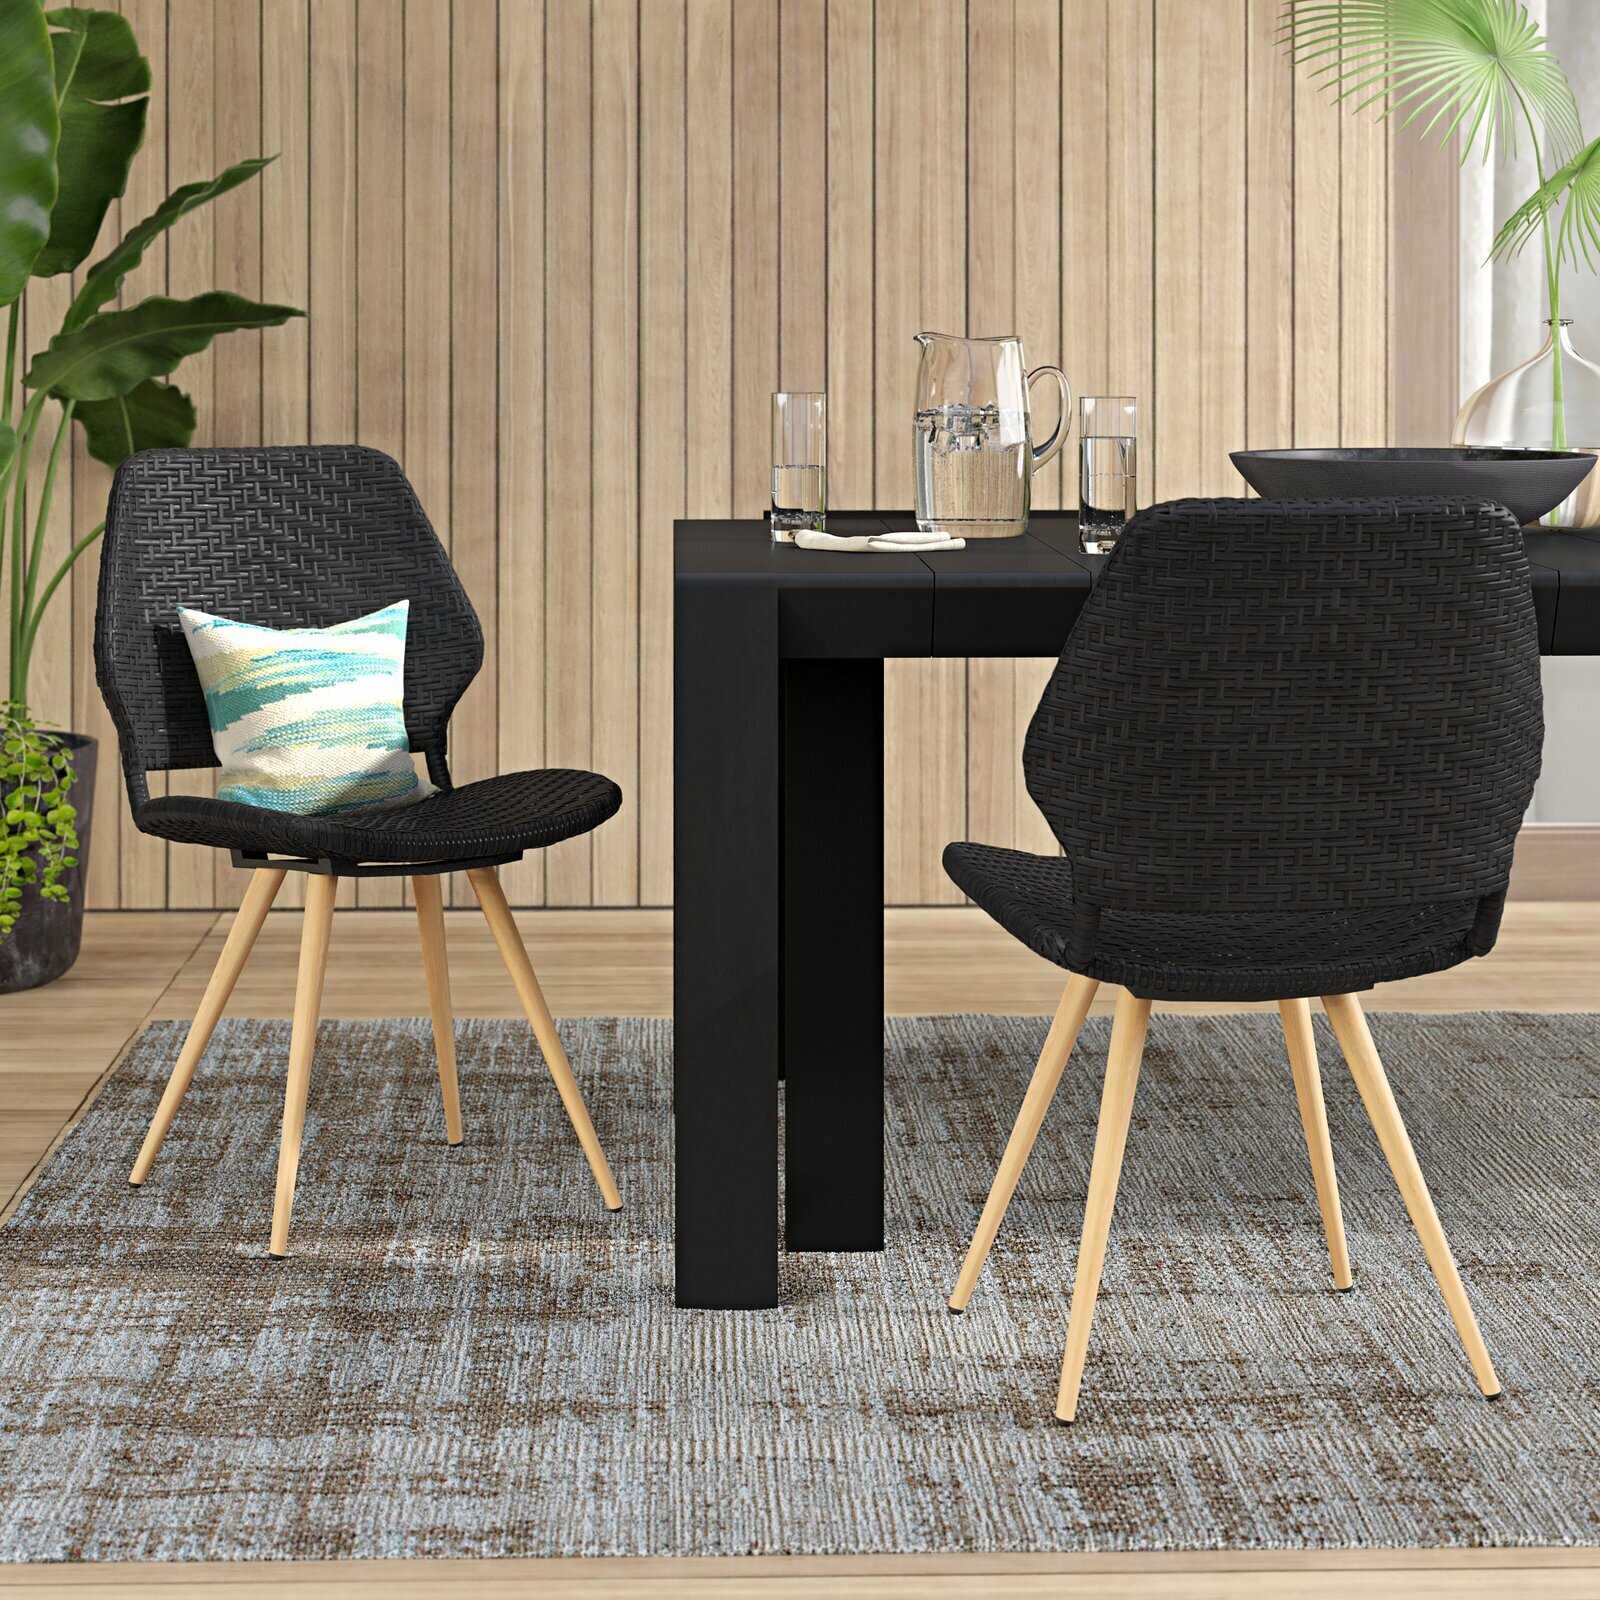 Tapered Black Wicker Chairs